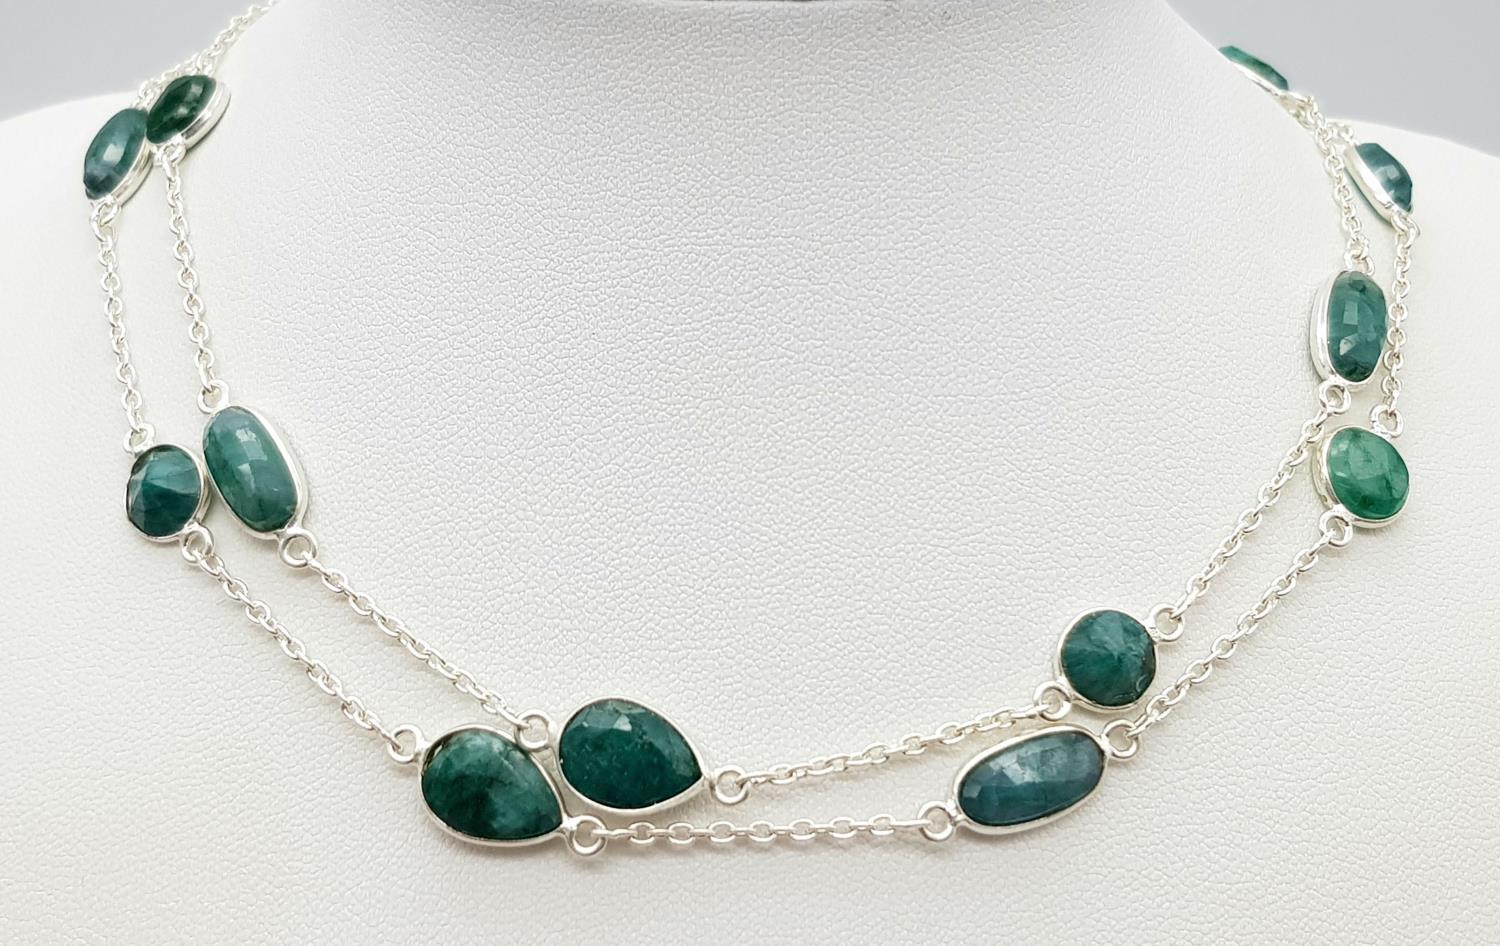 An Emerald Gemstone Long Chain necklace with Matching Drop Earrings. Set in 925 silver. 64cm - Image 4 of 5